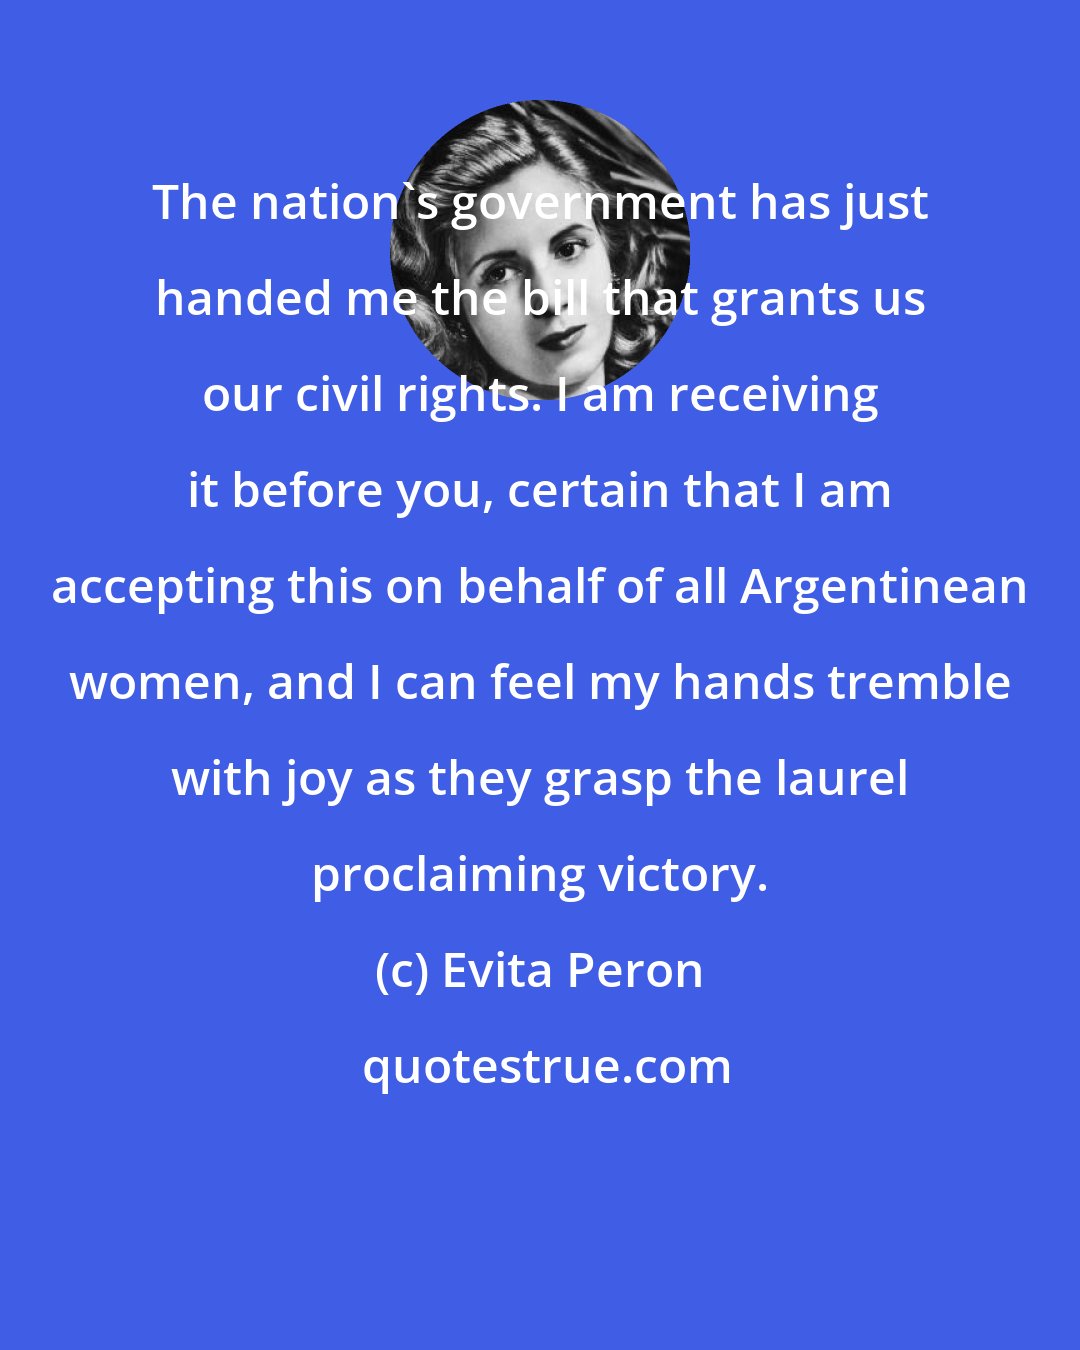 Evita Peron: The nation's government has just handed me the bill that grants us our civil rights. I am receiving it before you, certain that I am accepting this on behalf of all Argentinean women, and I can feel my hands tremble with joy as they grasp the laurel proclaiming victory.